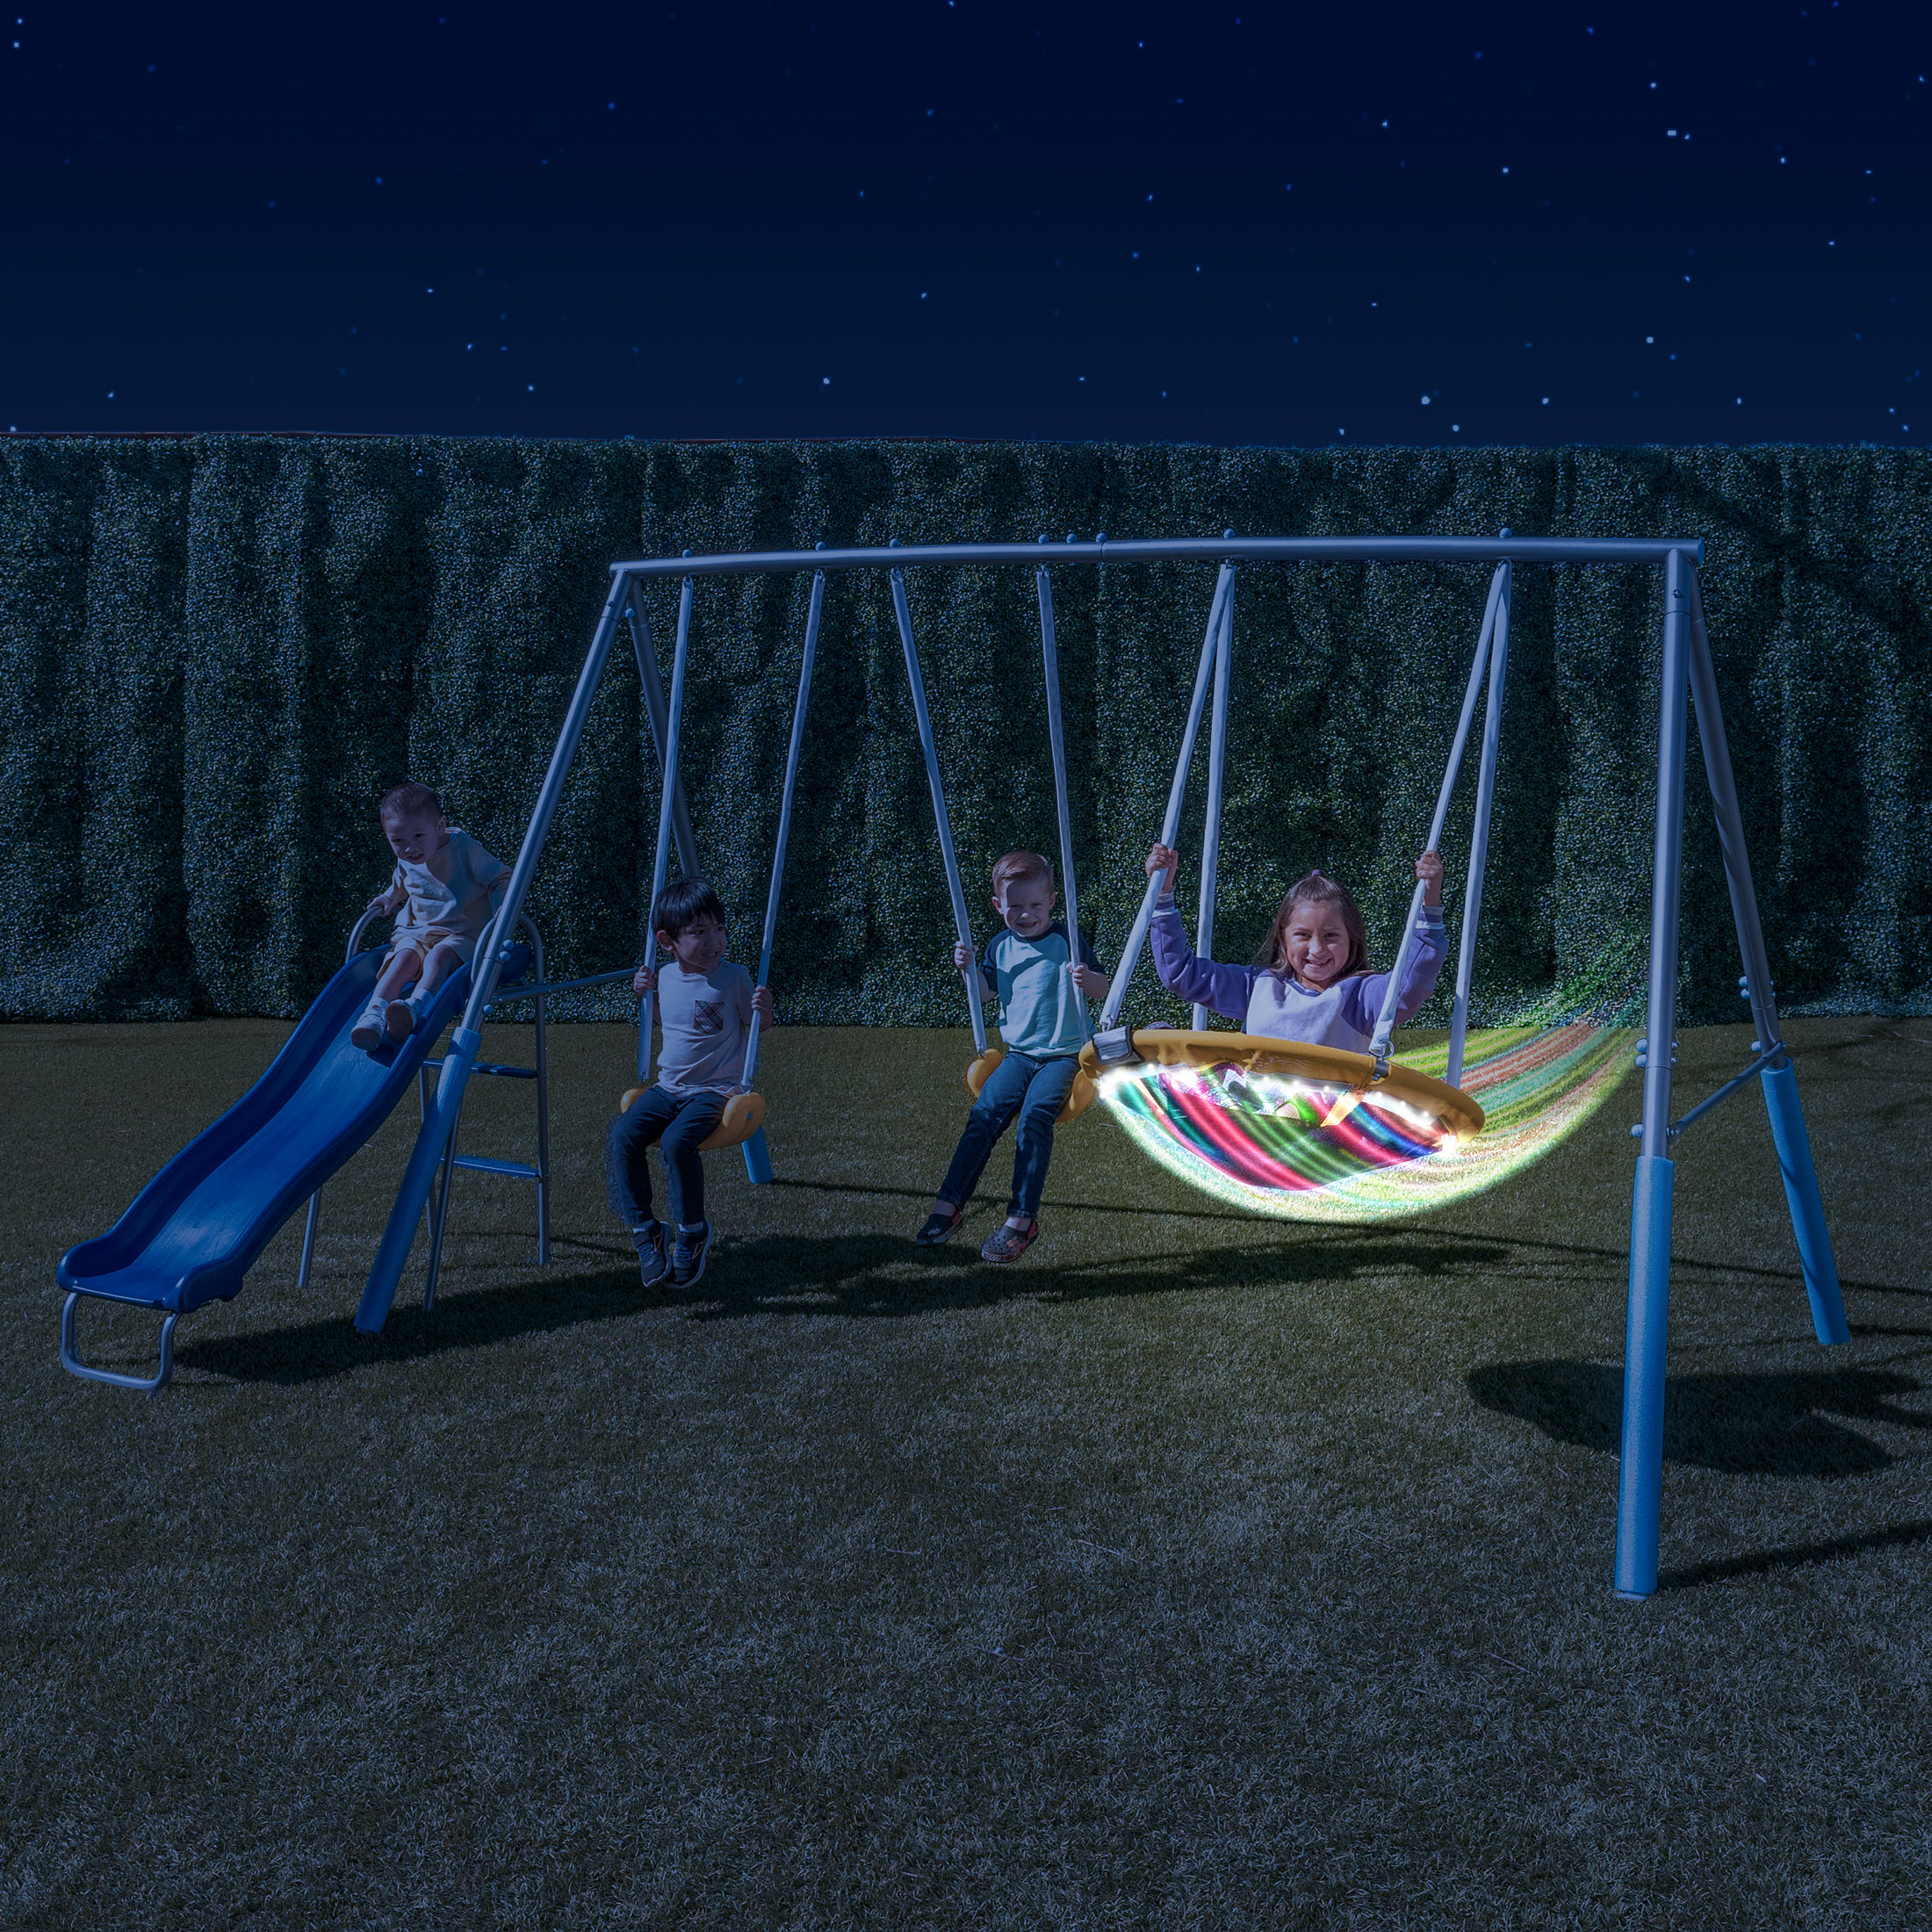 Sportspower Comet Metal Swing Set with LED Light up Saucer Swing, 2 Swings, and Lifetime Warranty on Blow Molded Slide - image 3 of 15